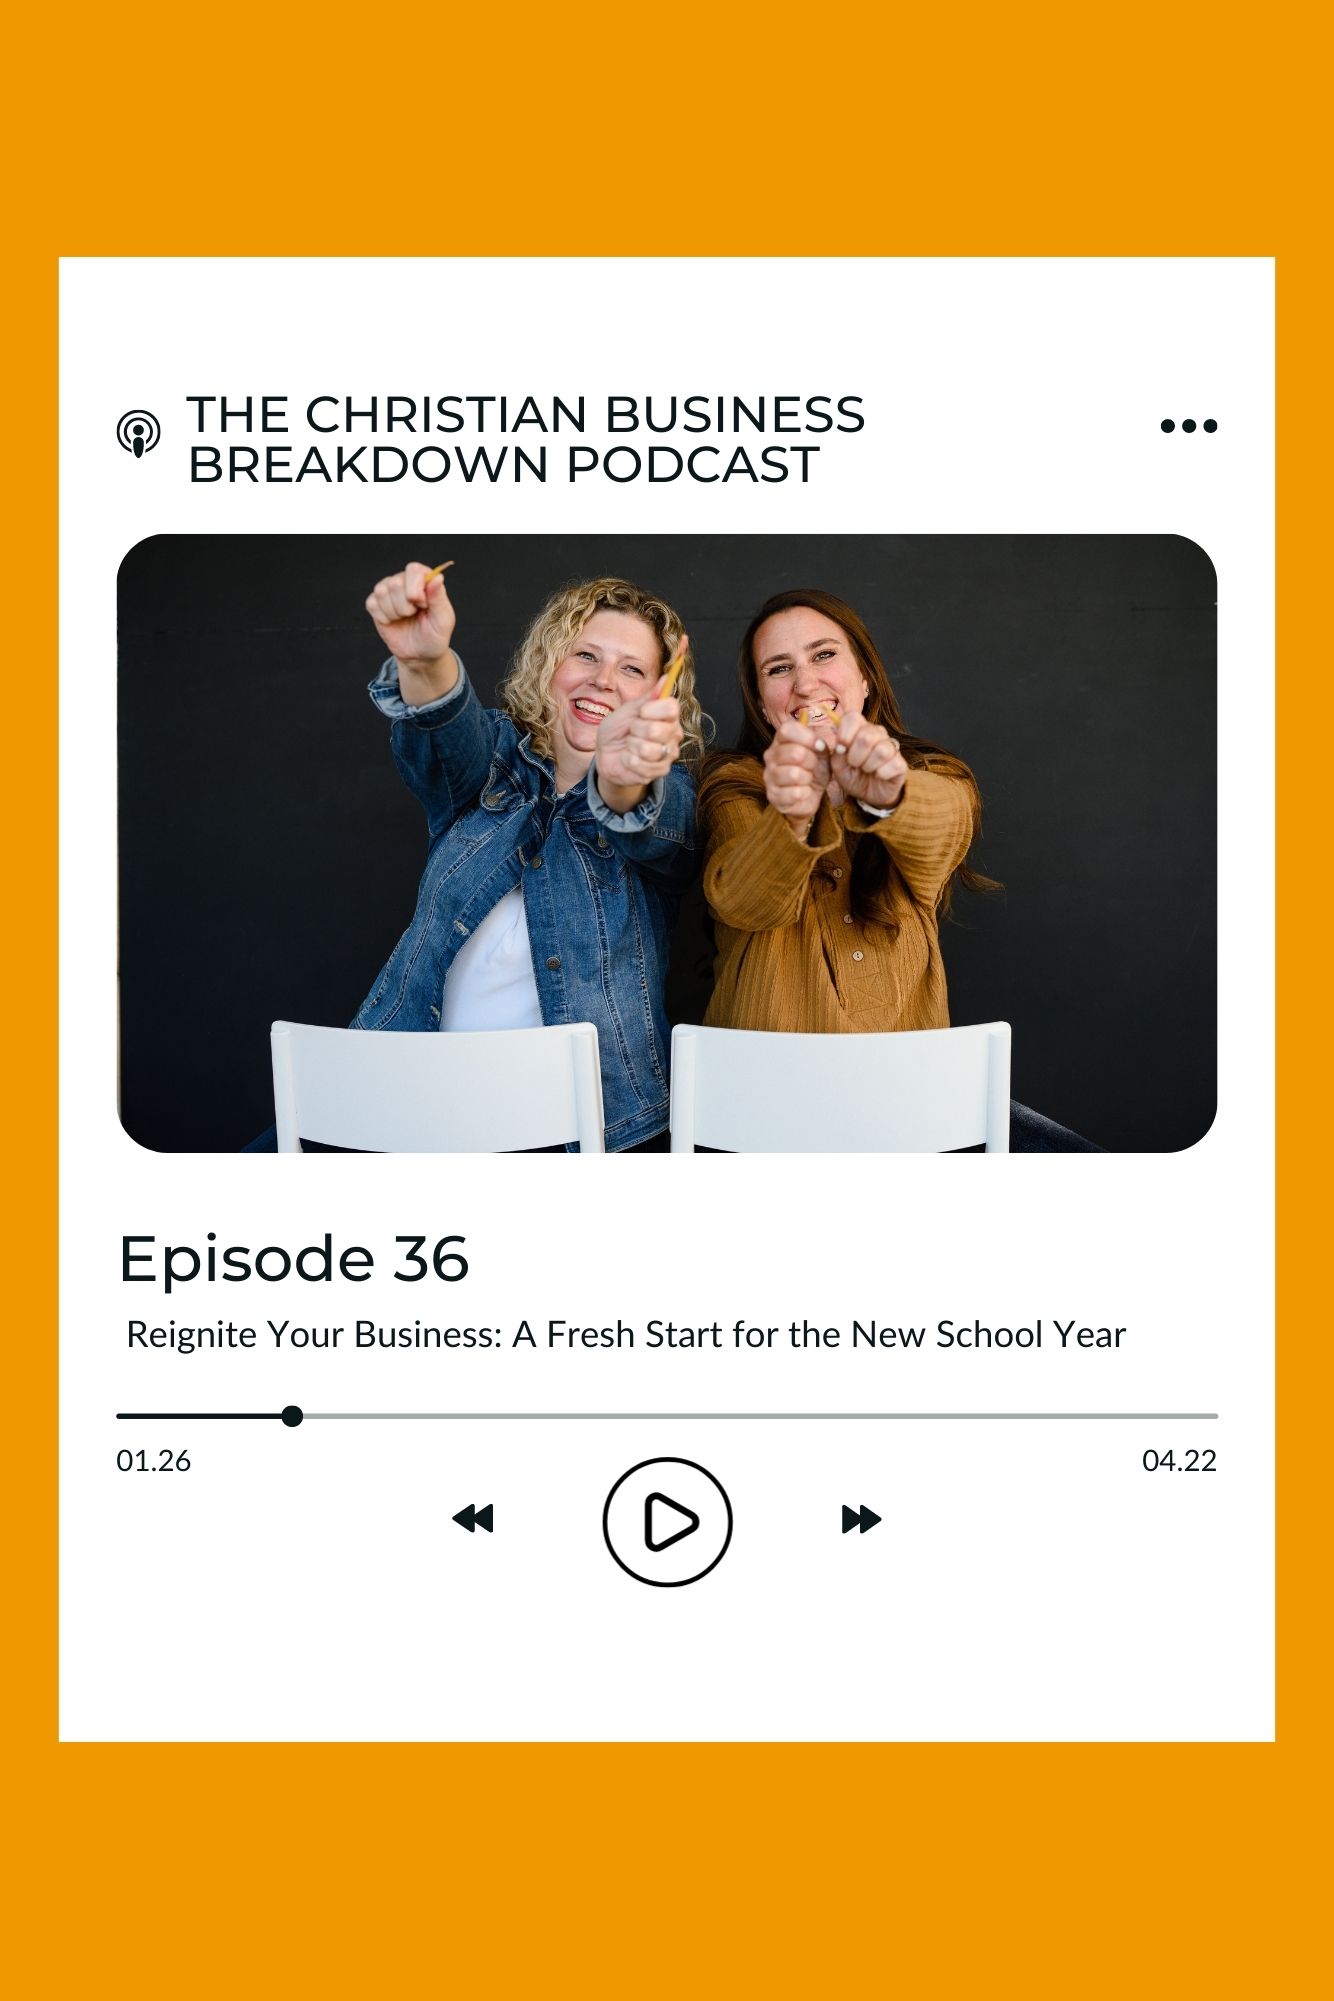 Two women sitting and breaking pencils to symbolize their Christian women's business podcast about reigniting your business.